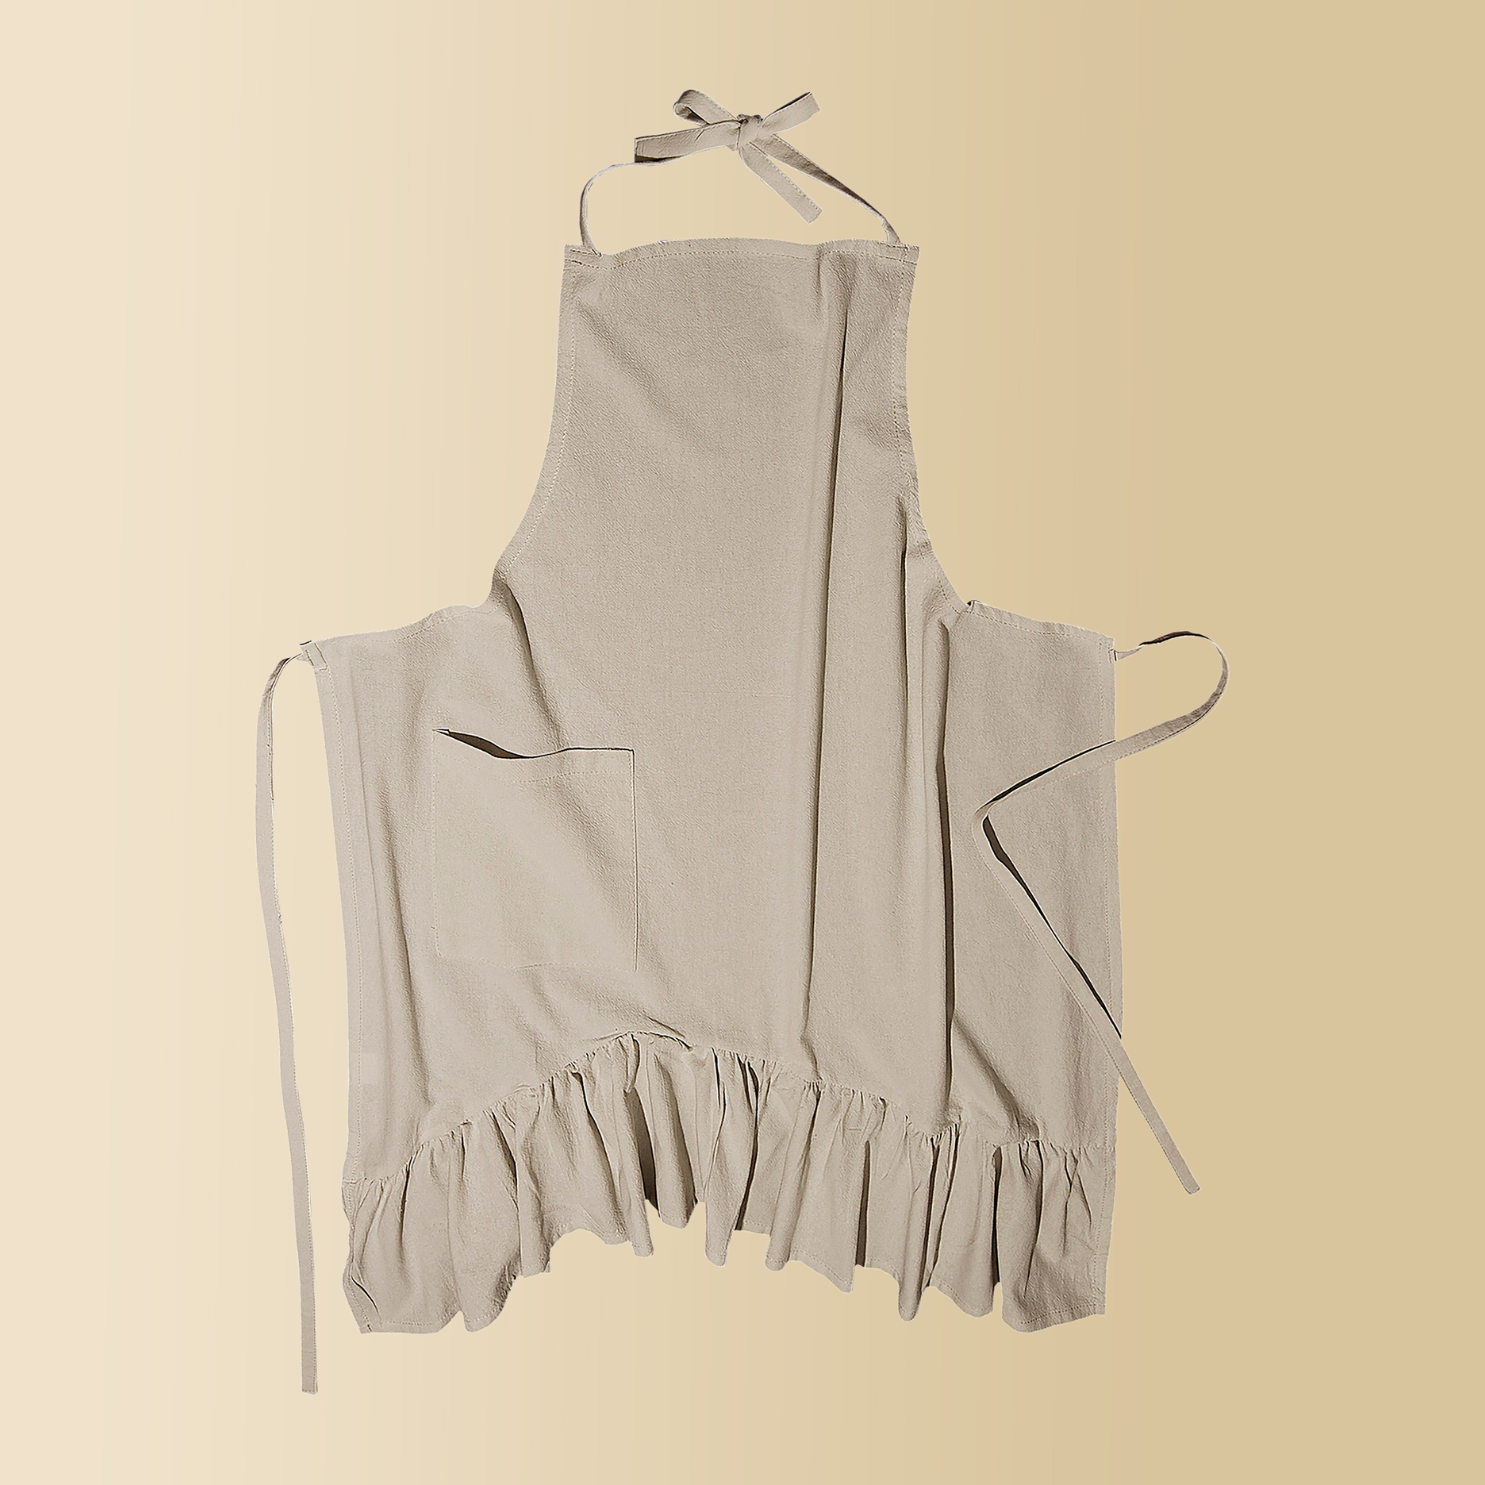 Apron made of linen blend in silk gray